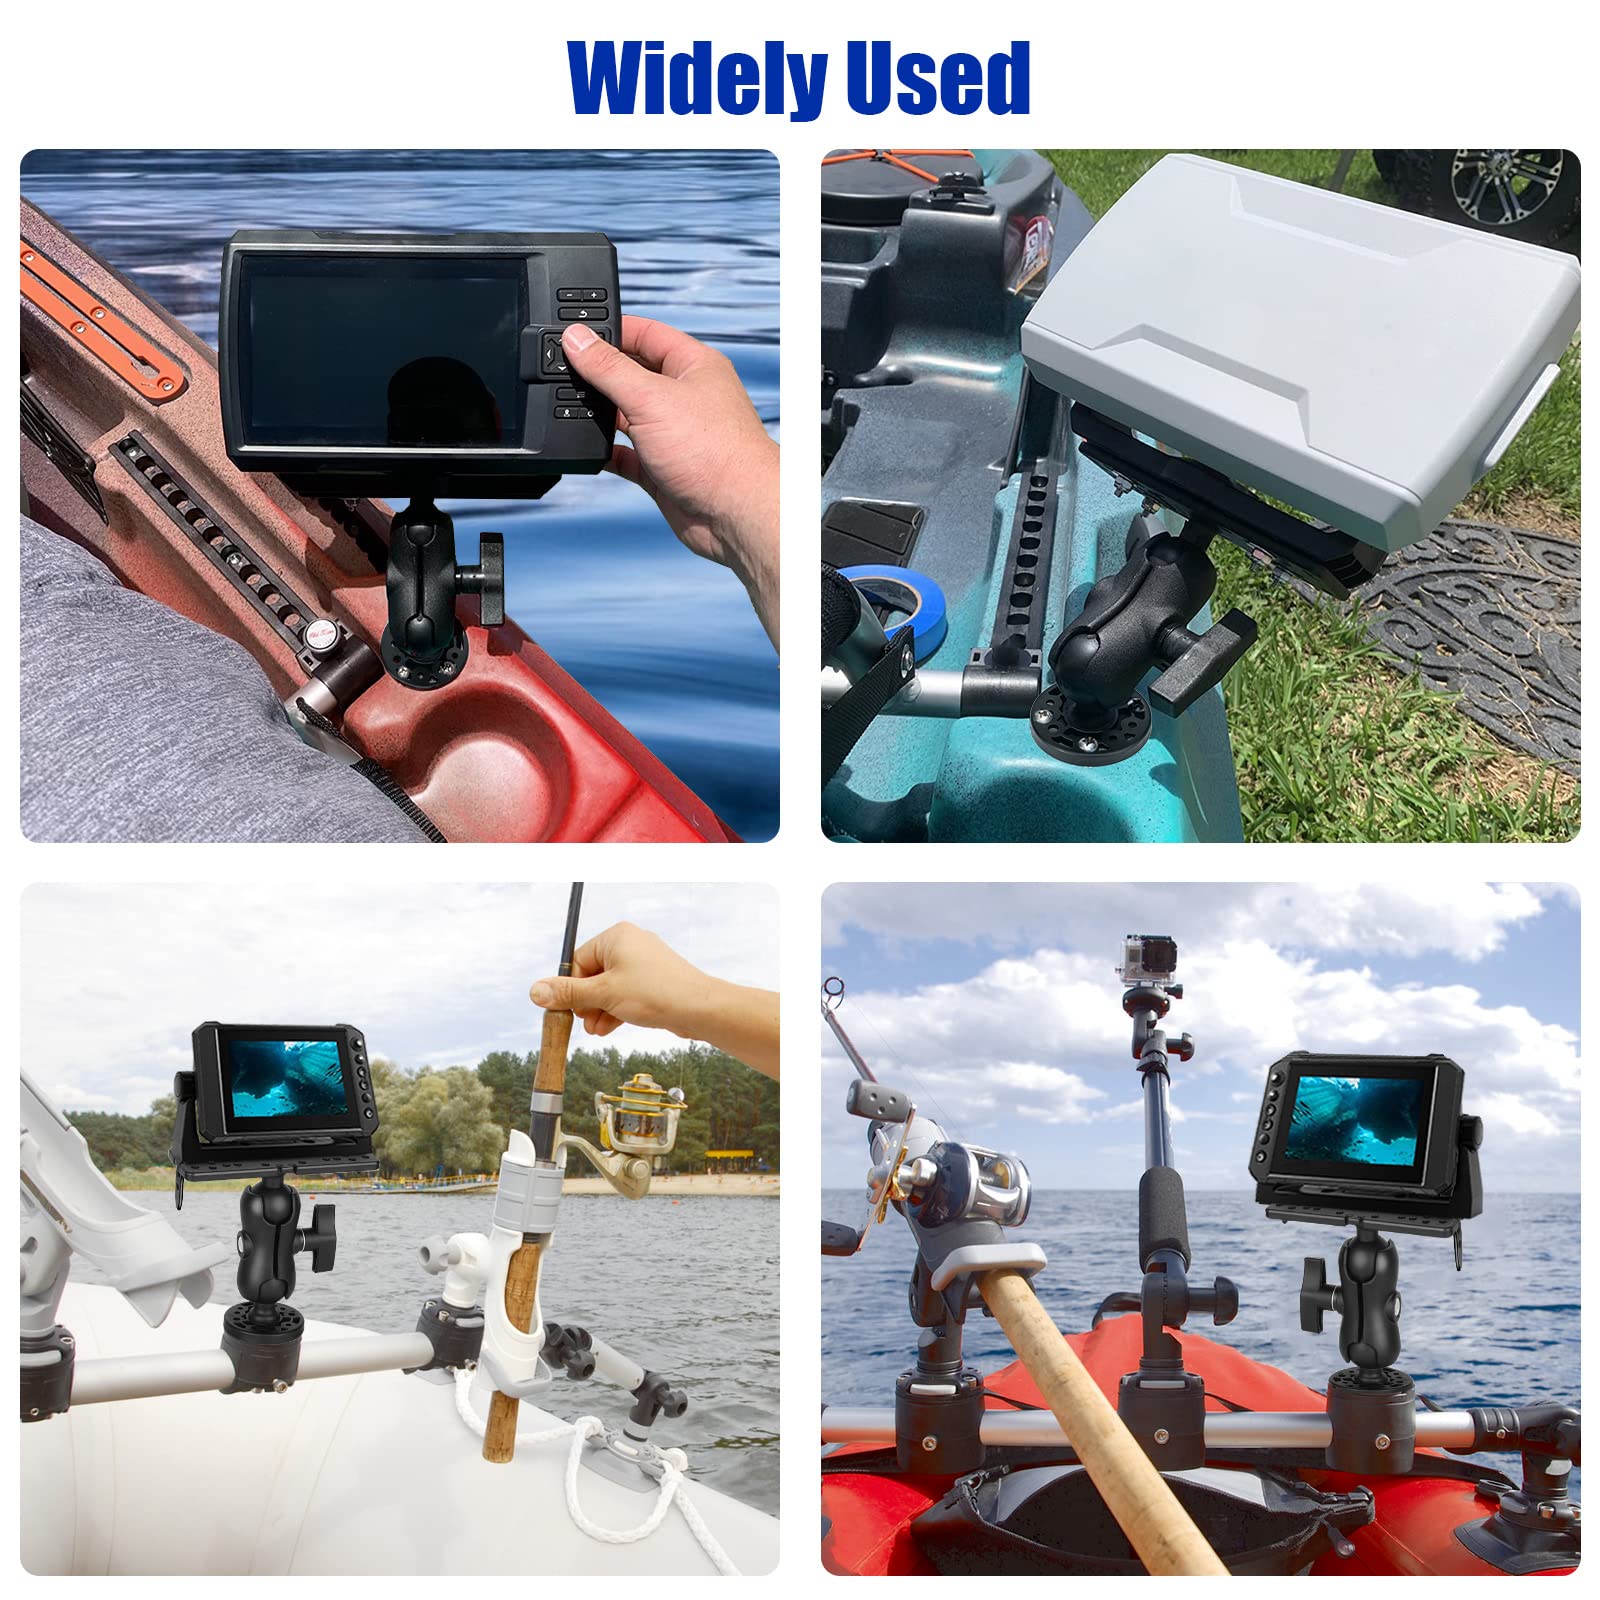 Fish Finder Mount Base, Marine Electronic Fish Finder Mount, Ball-Mount Fish Finder Bracket, 360° Rotation Fish Finder Holder, Universal Kayak Mounting Plate, Fish Finder Accessories for Boat Yacht